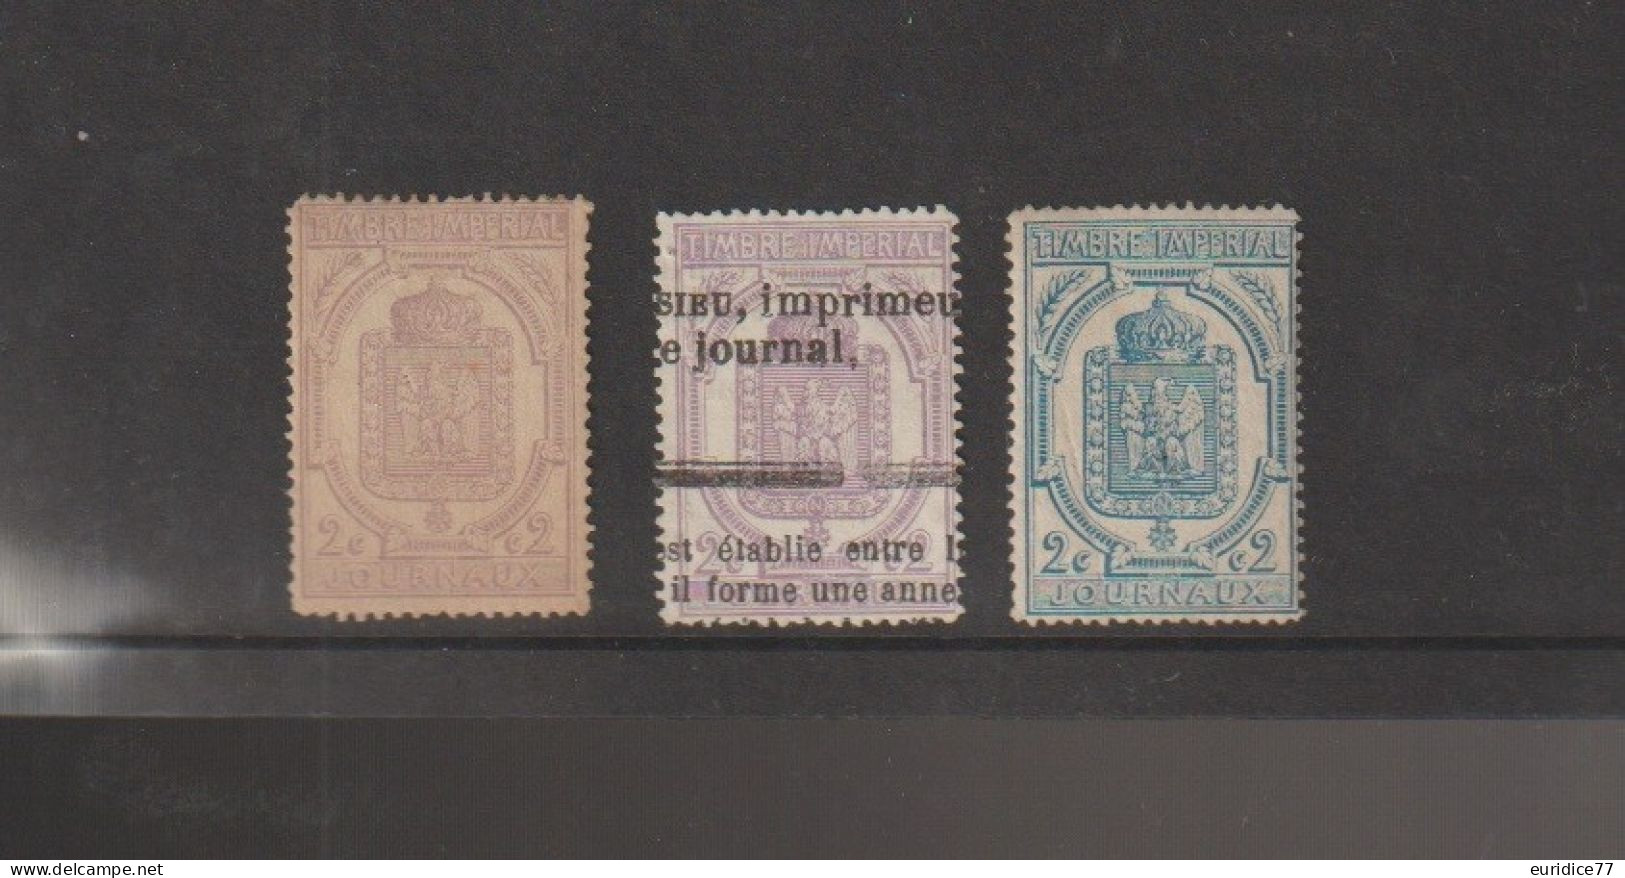 France 1869 - Timbre Imperial Journaux * - Giornali